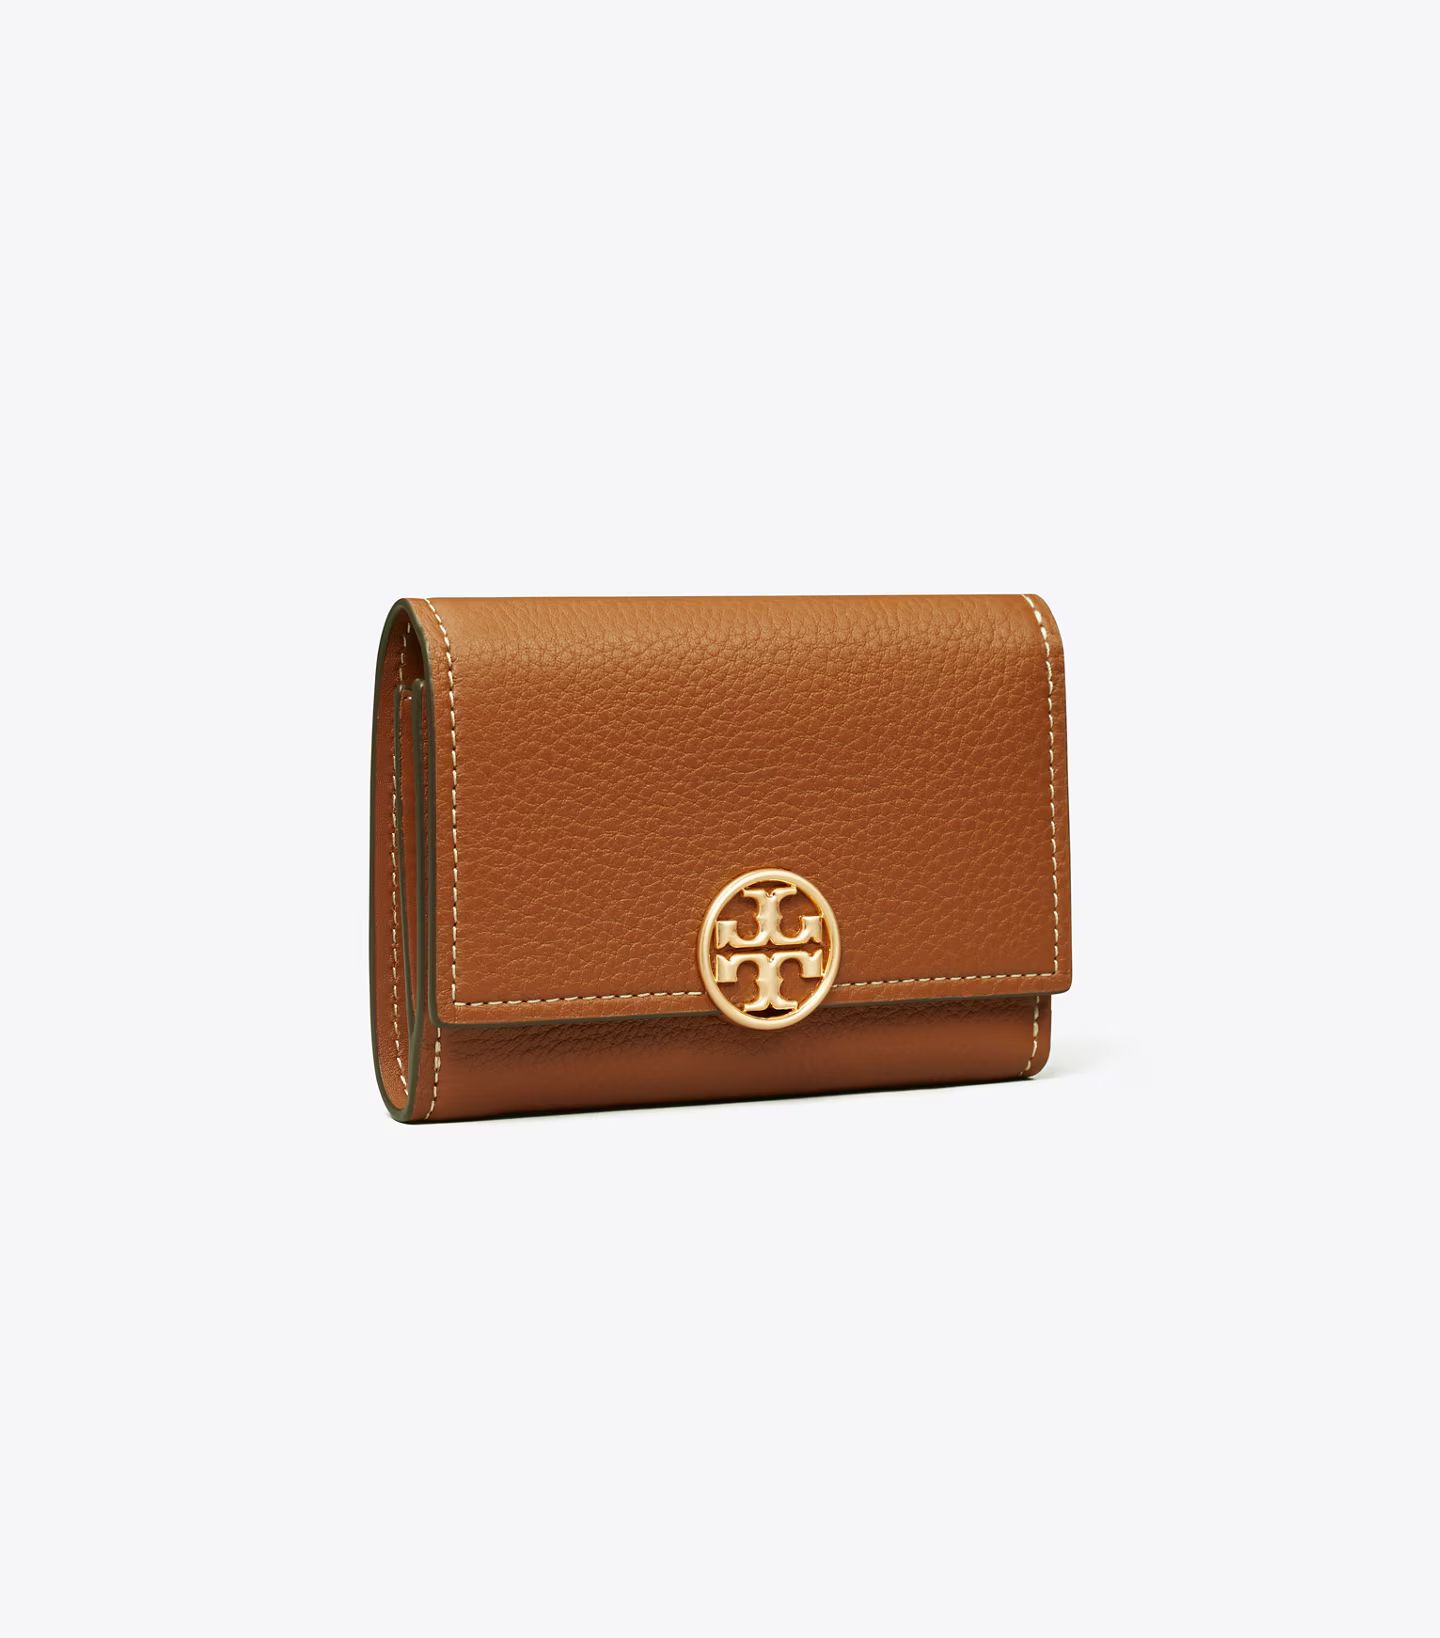 Session is about to end29:34Continue to save your informationContinue | Tory Burch (US)